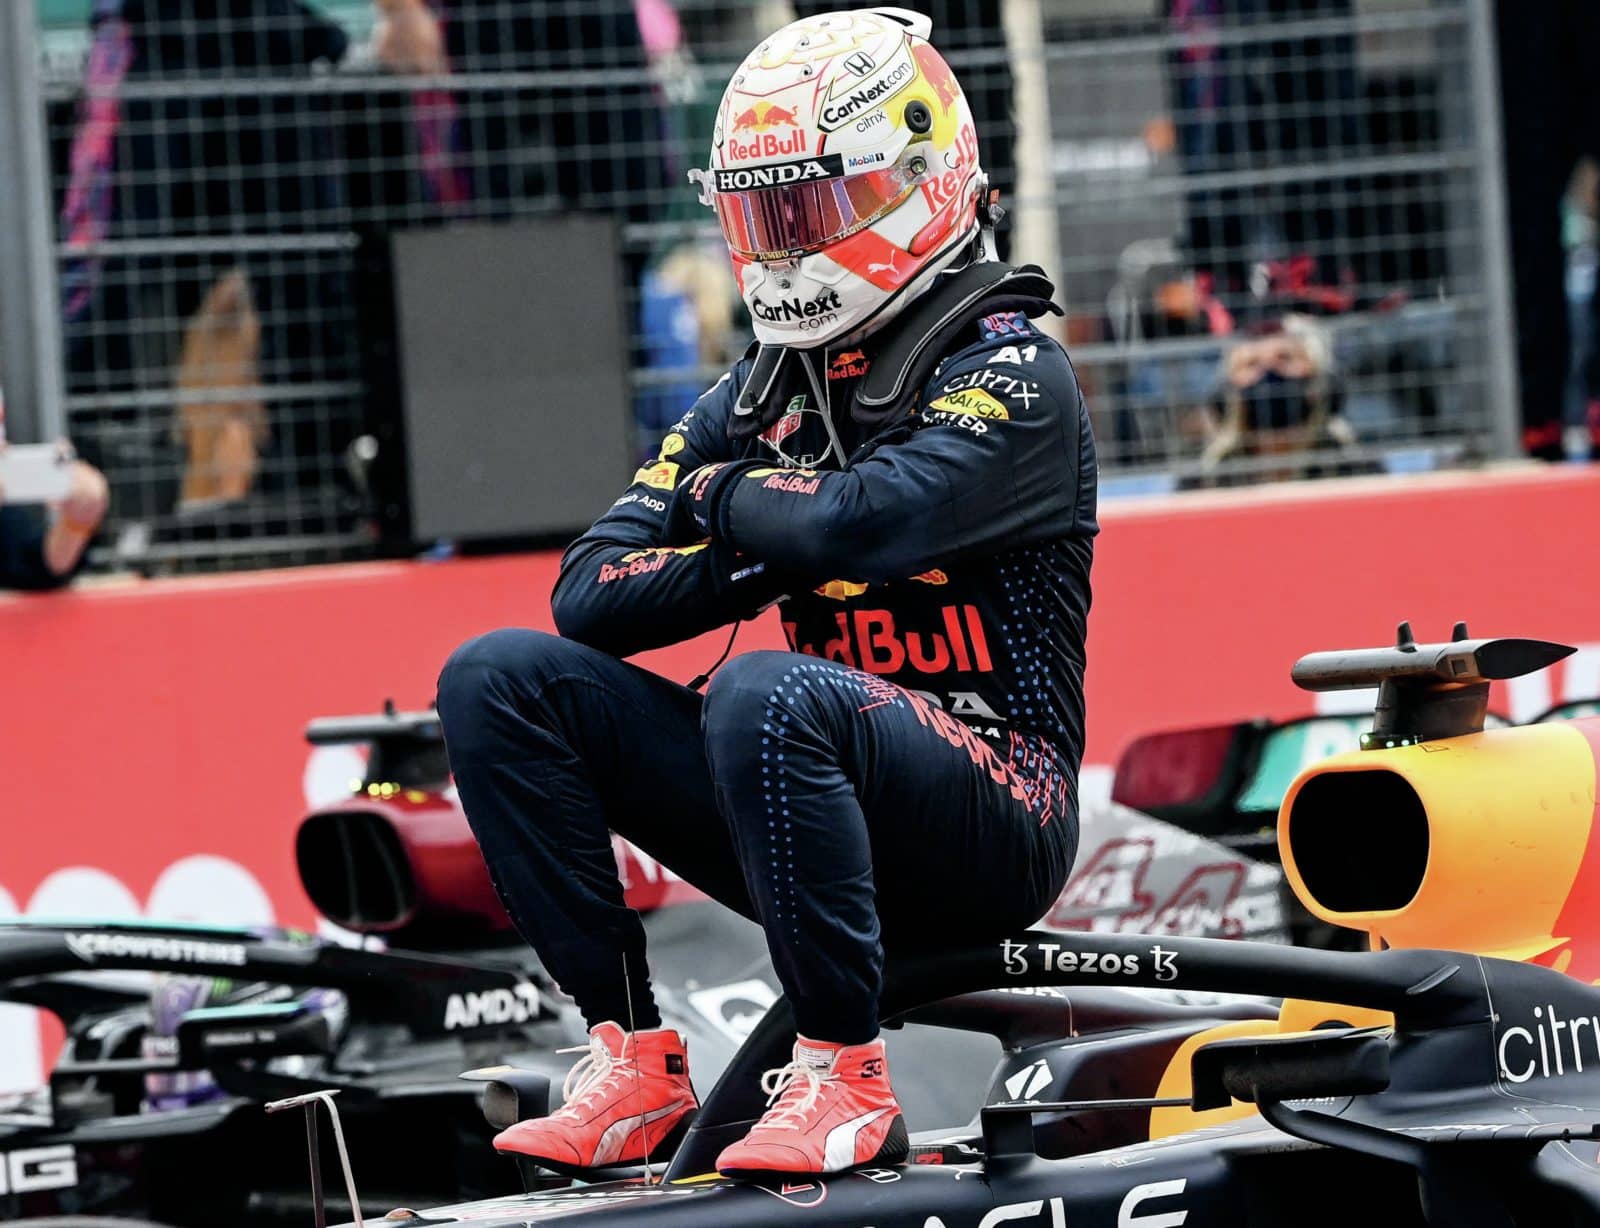 Max Verstappen sits on his Red Bull after winning the 2021 French Grand Prix